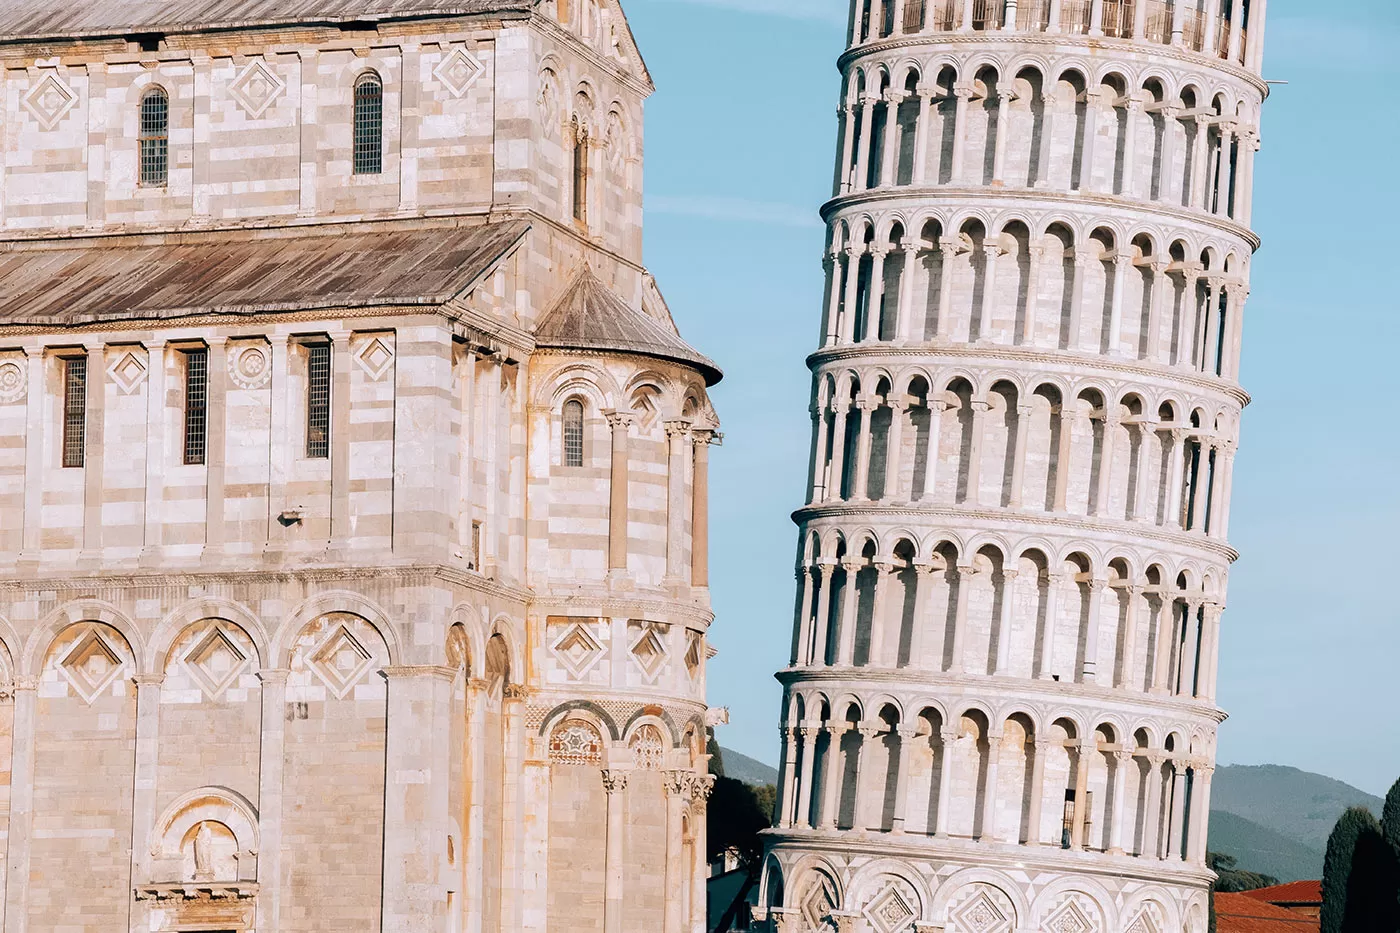 Best things to do in Florence - Day trip to Pisa - Leaning Tower of Pisa